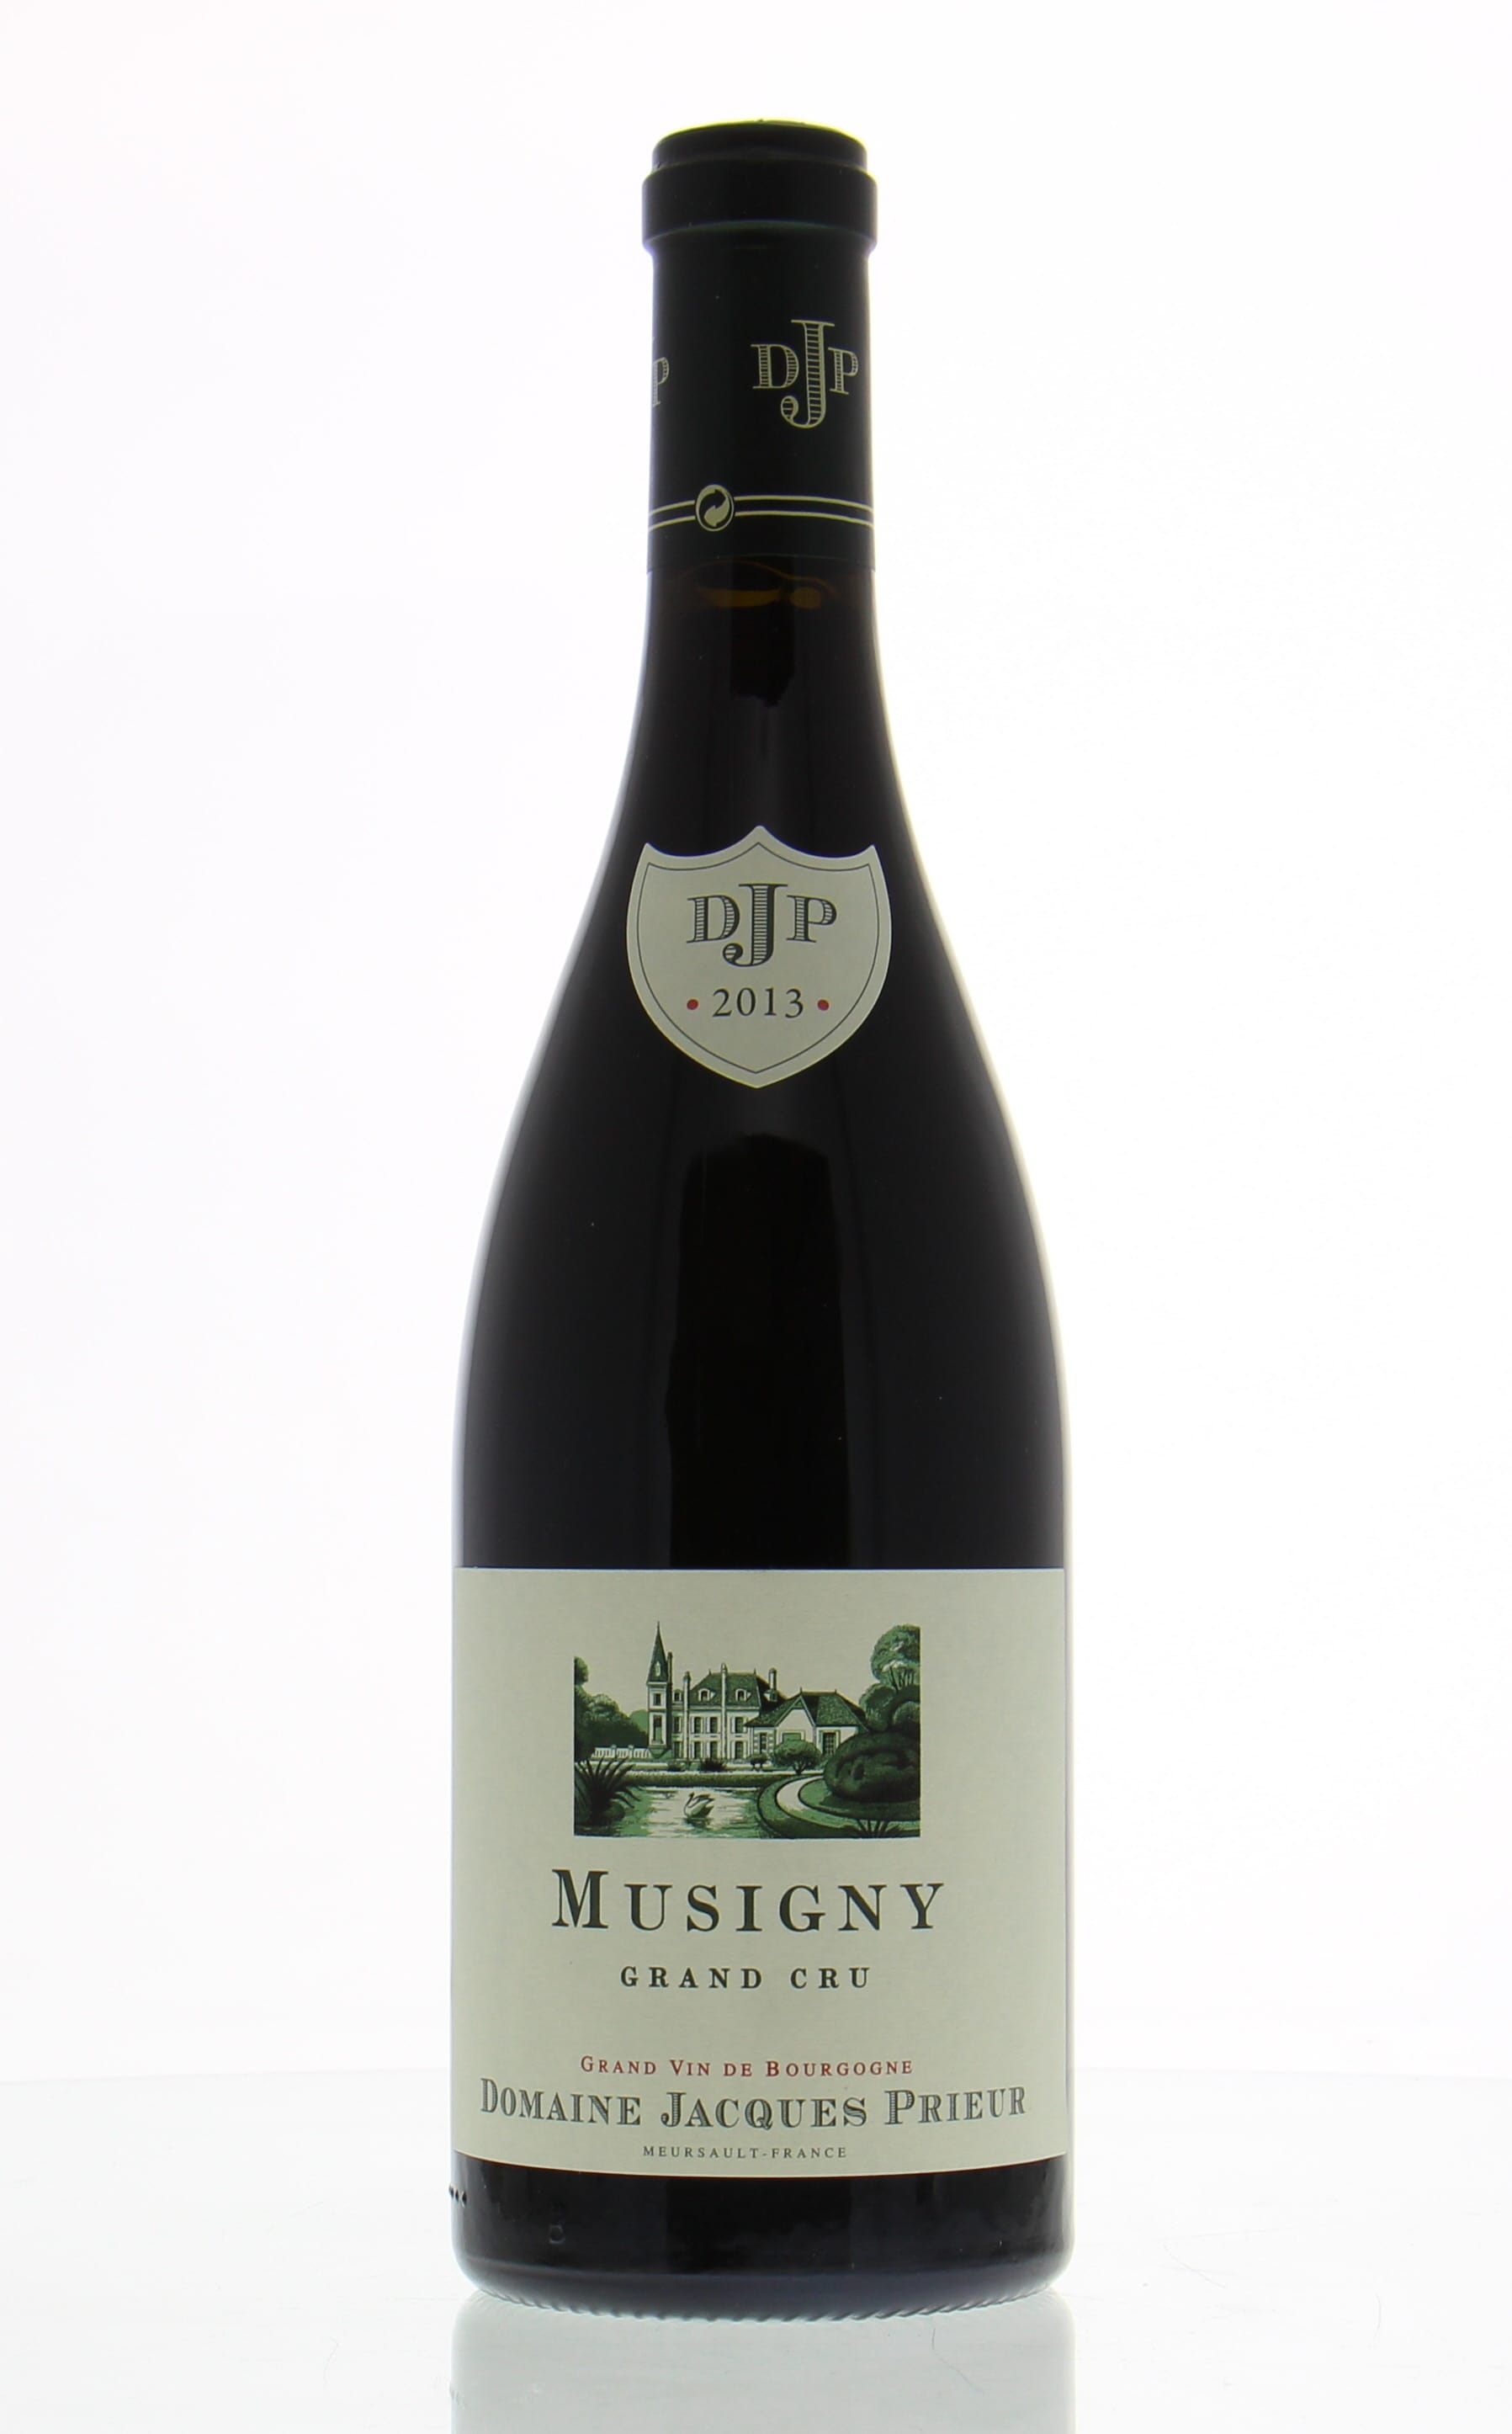 Domaine Jacques Prieur - Musigny 2013 Perfect